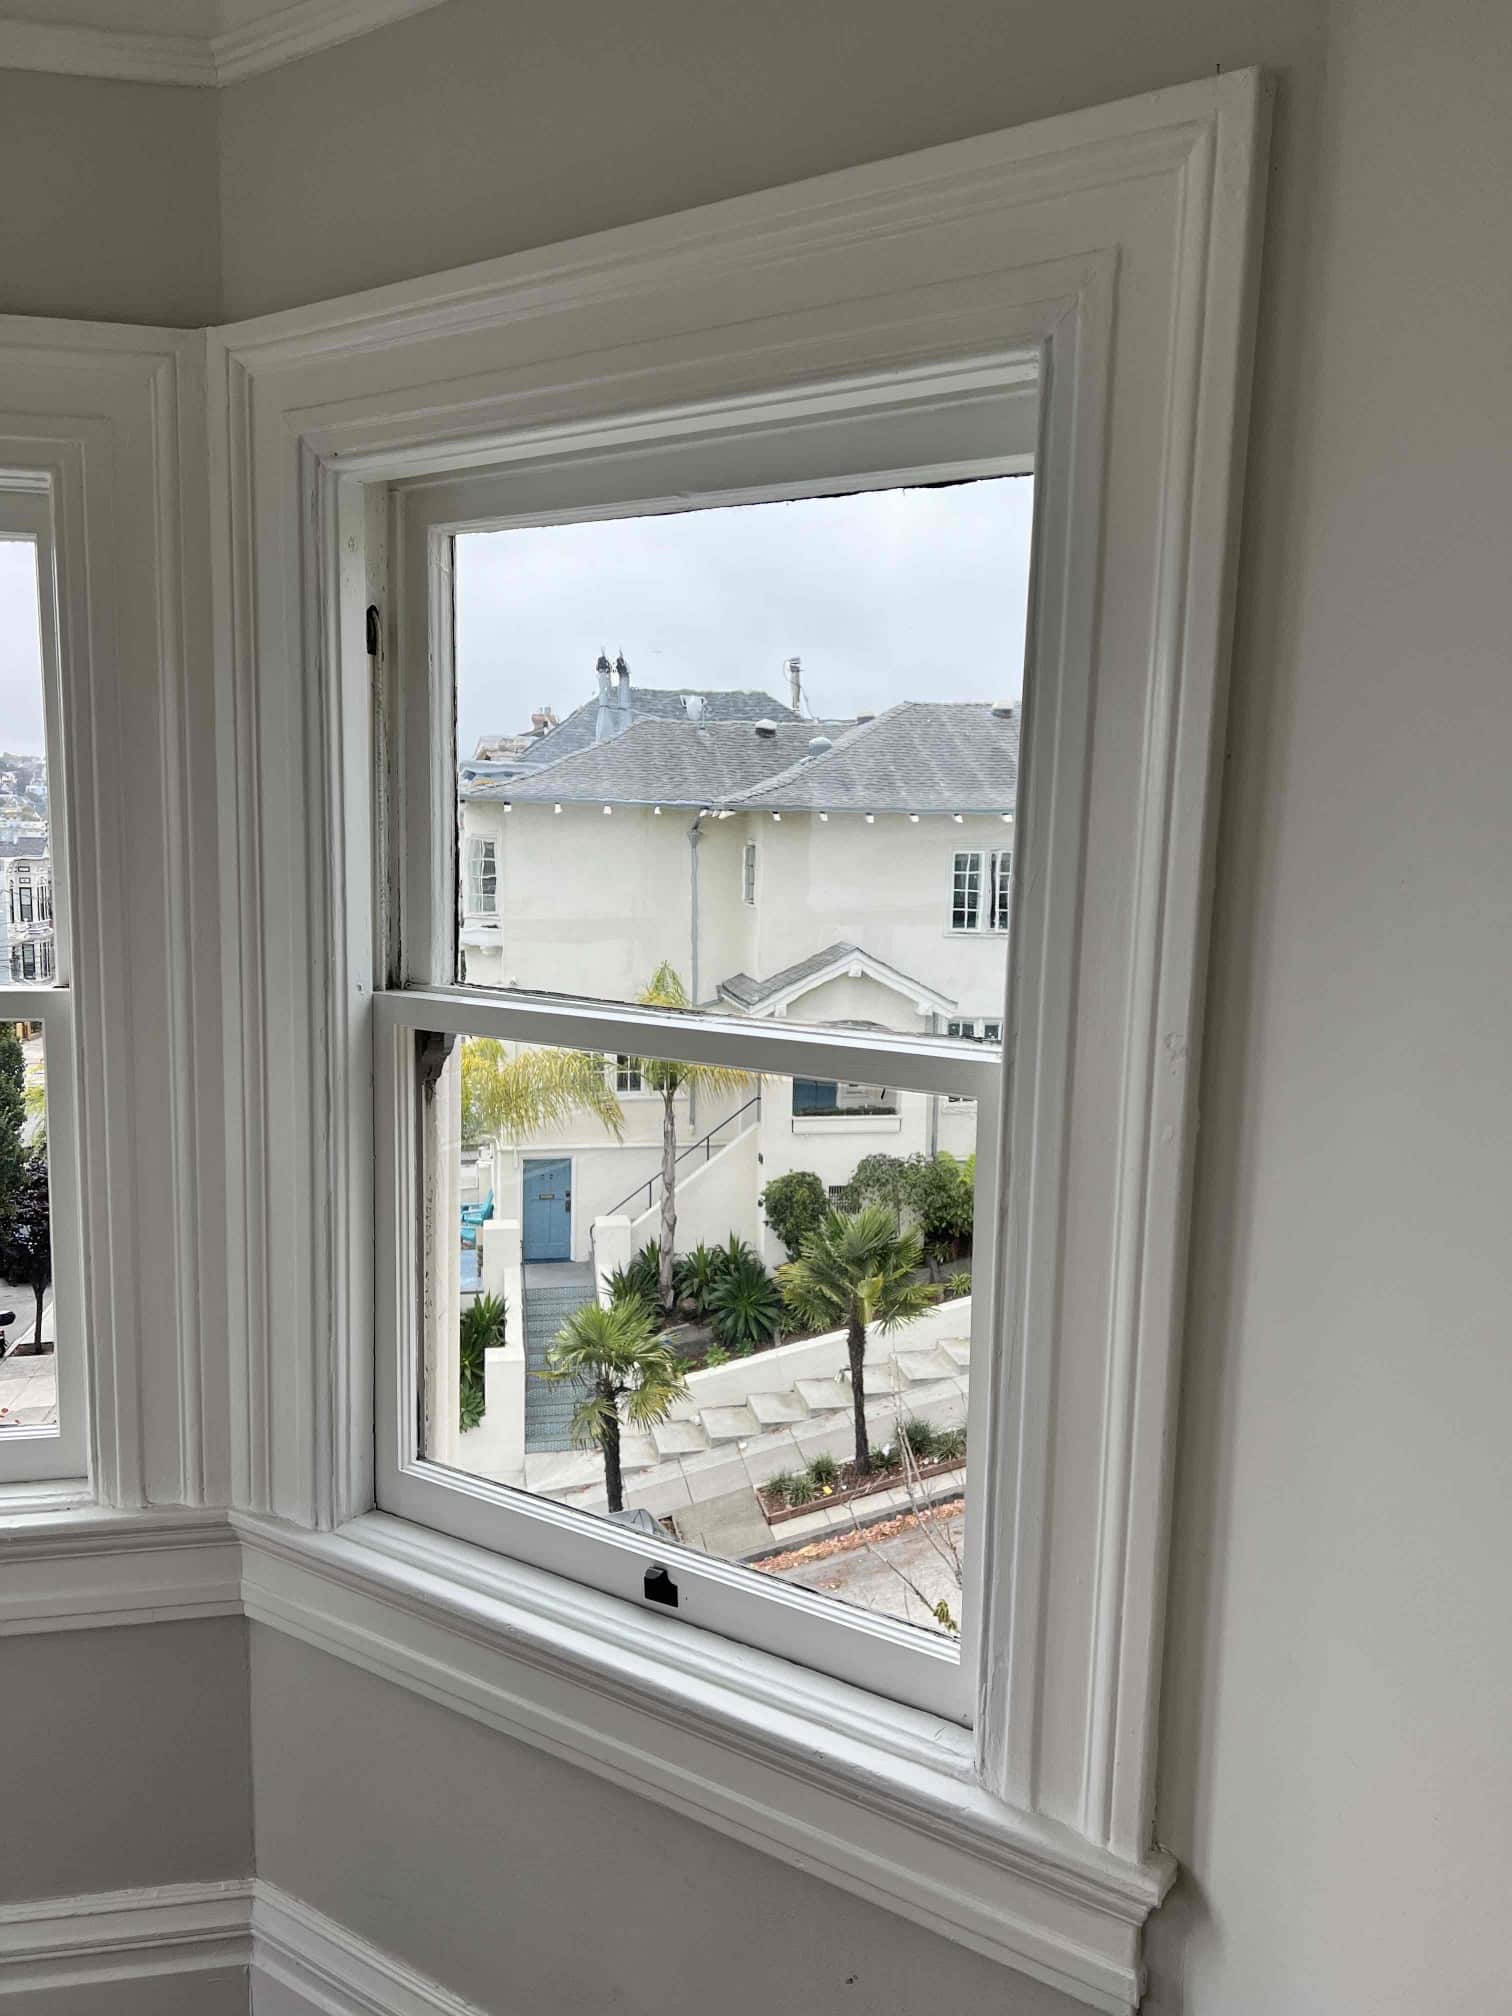 A lovely home in San Francisco, transformed with 3M Prestige 70 Window Film. Installed by ClimatePro.